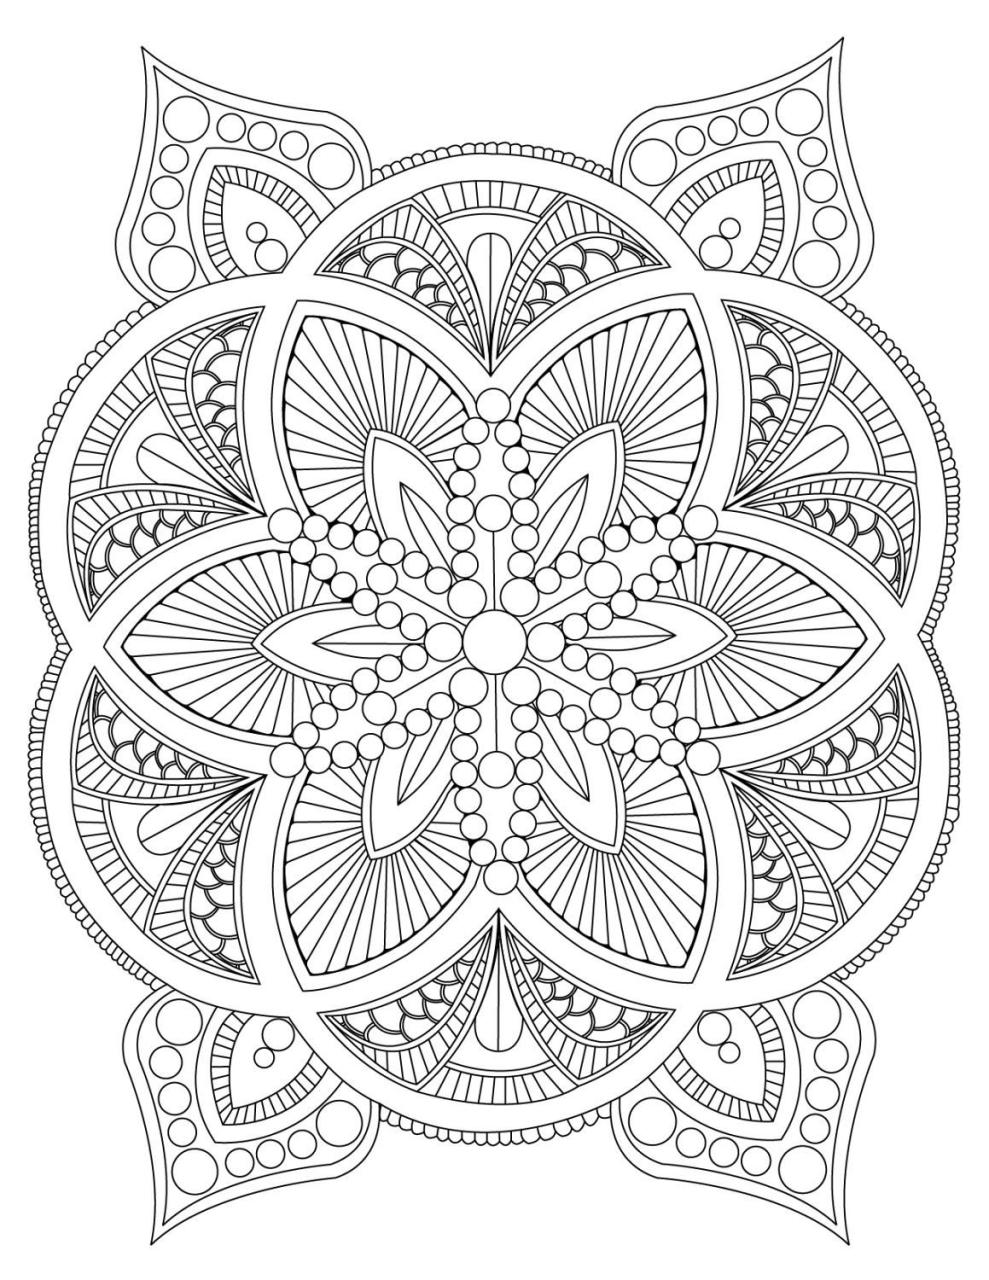 Mandala Cool Coloring Pages For Adults